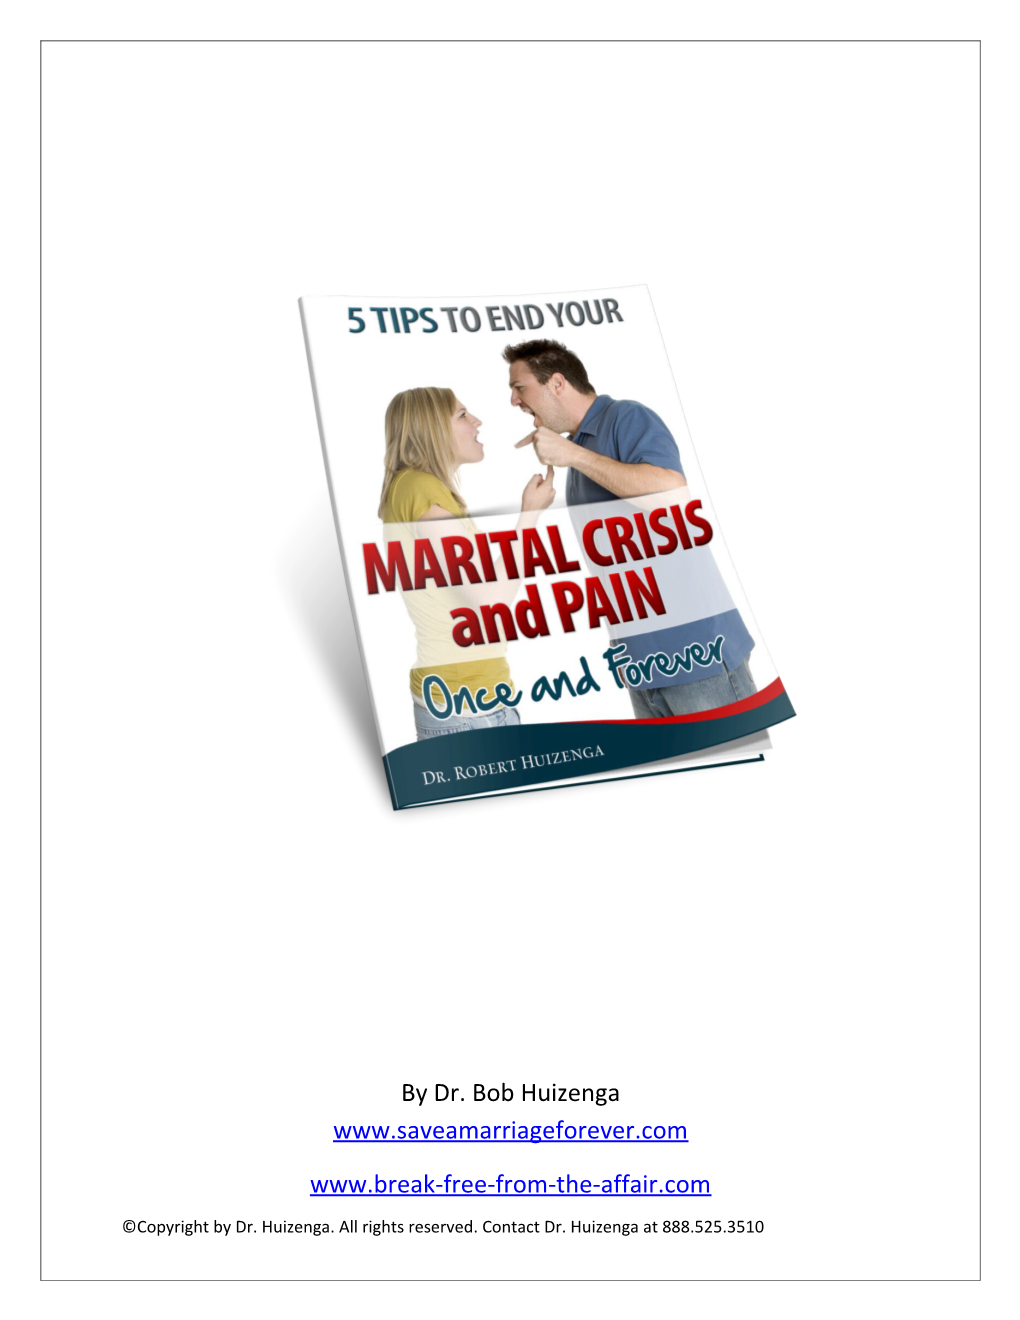 Tips to End Your Marital Crisis and Pain Once and Forever